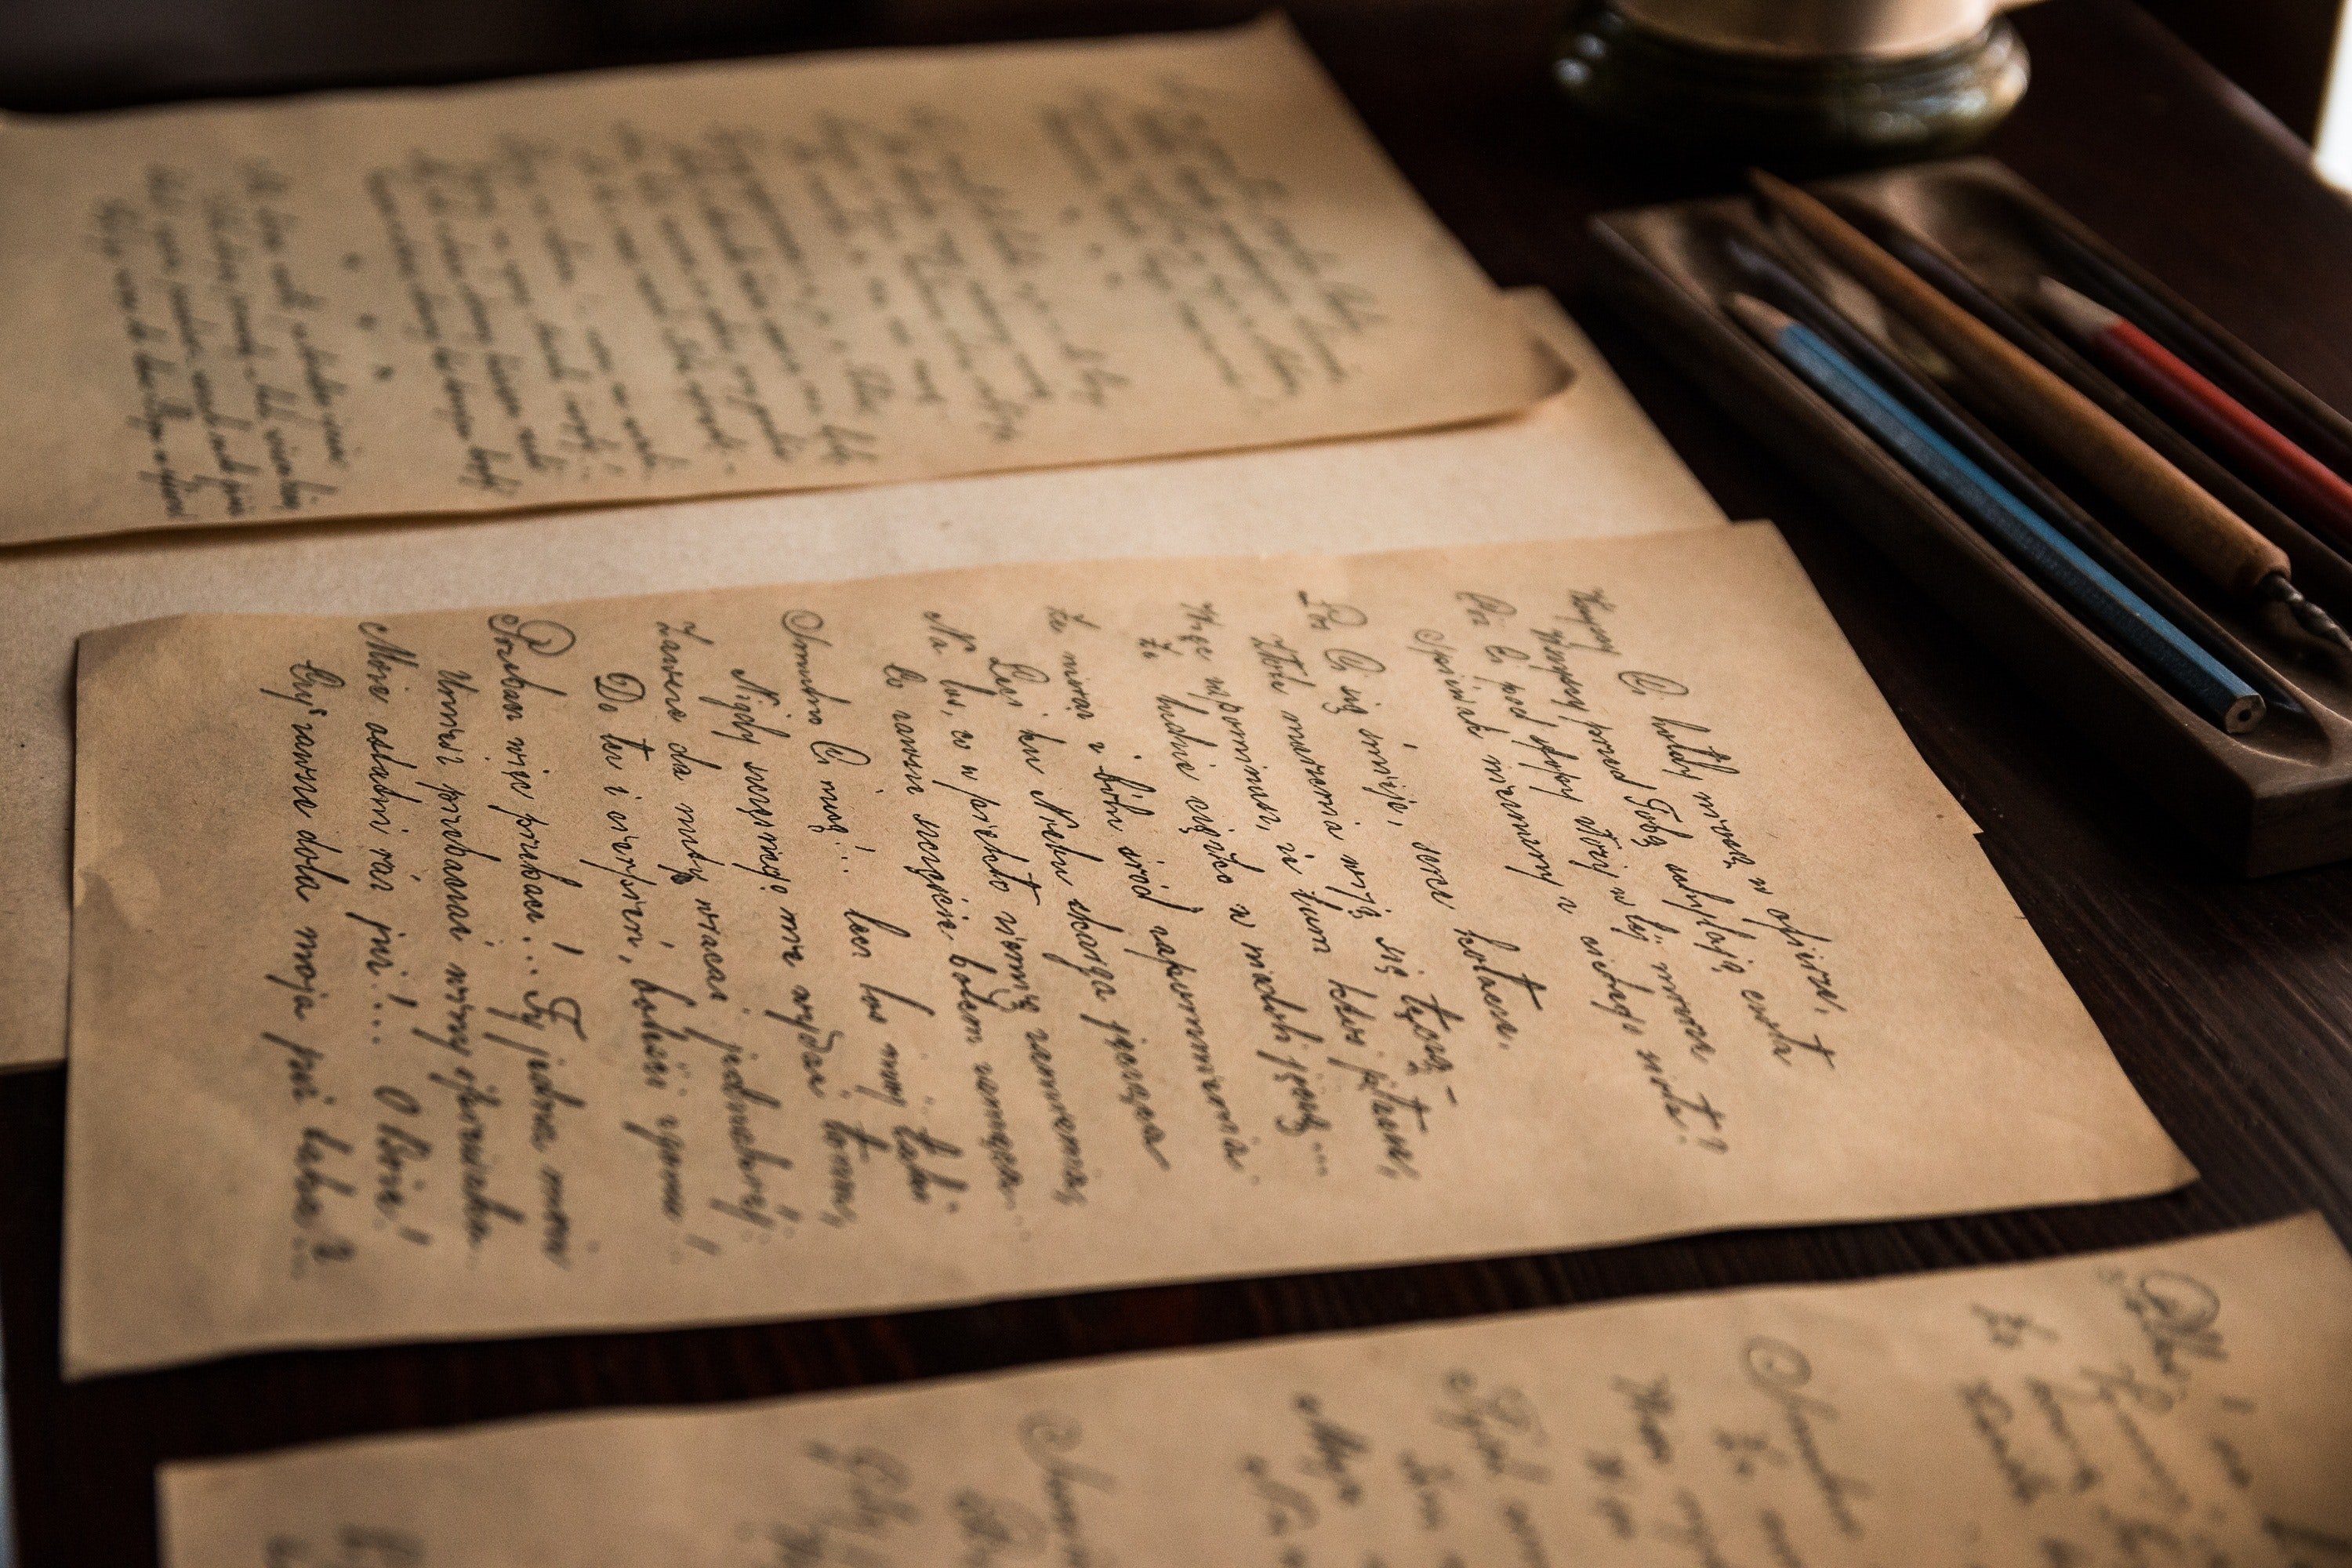 Joseph found an old letter in his father's handwriting. | Source: Pexels